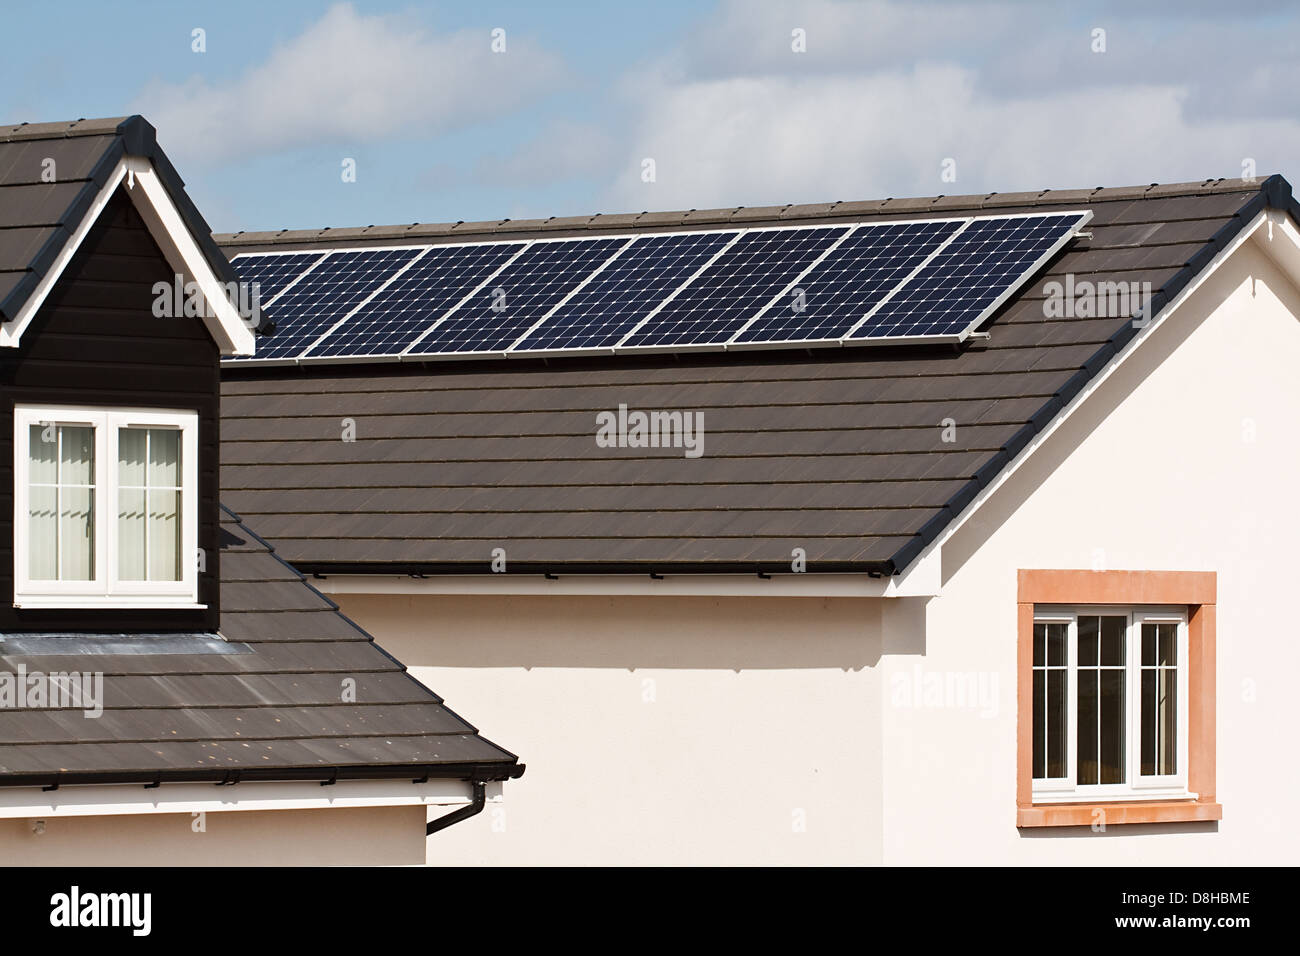 Photovoltaic Solar panels Mounted on the tiled roof of a modern residential or private home Stock Photo